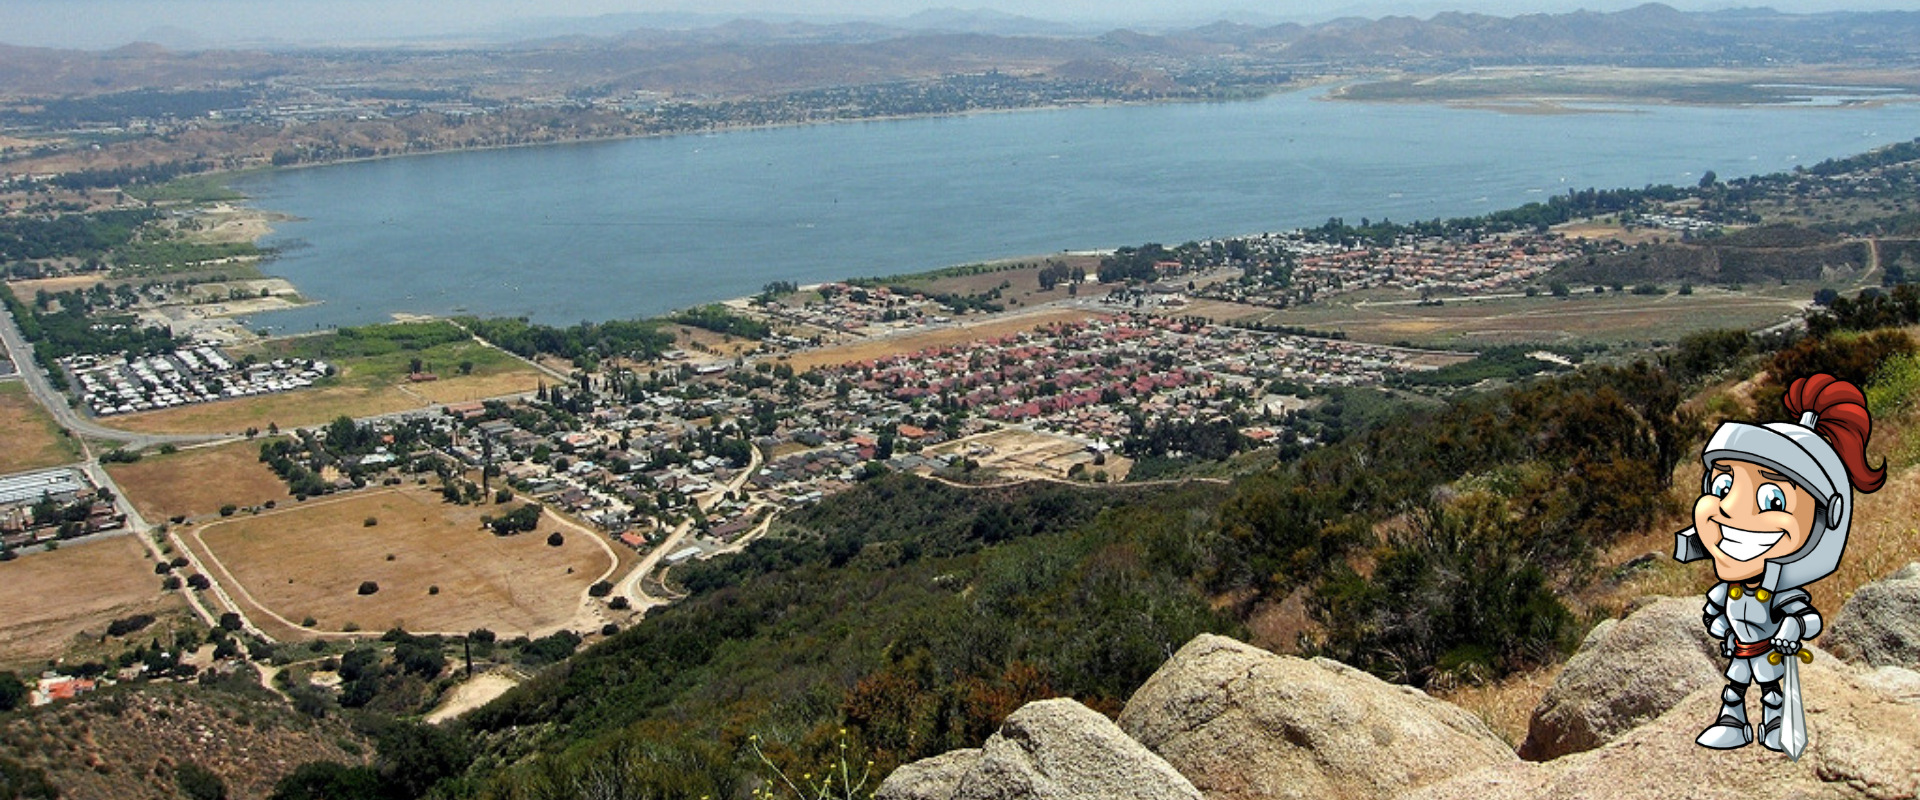 sell my house fast lake elsinore